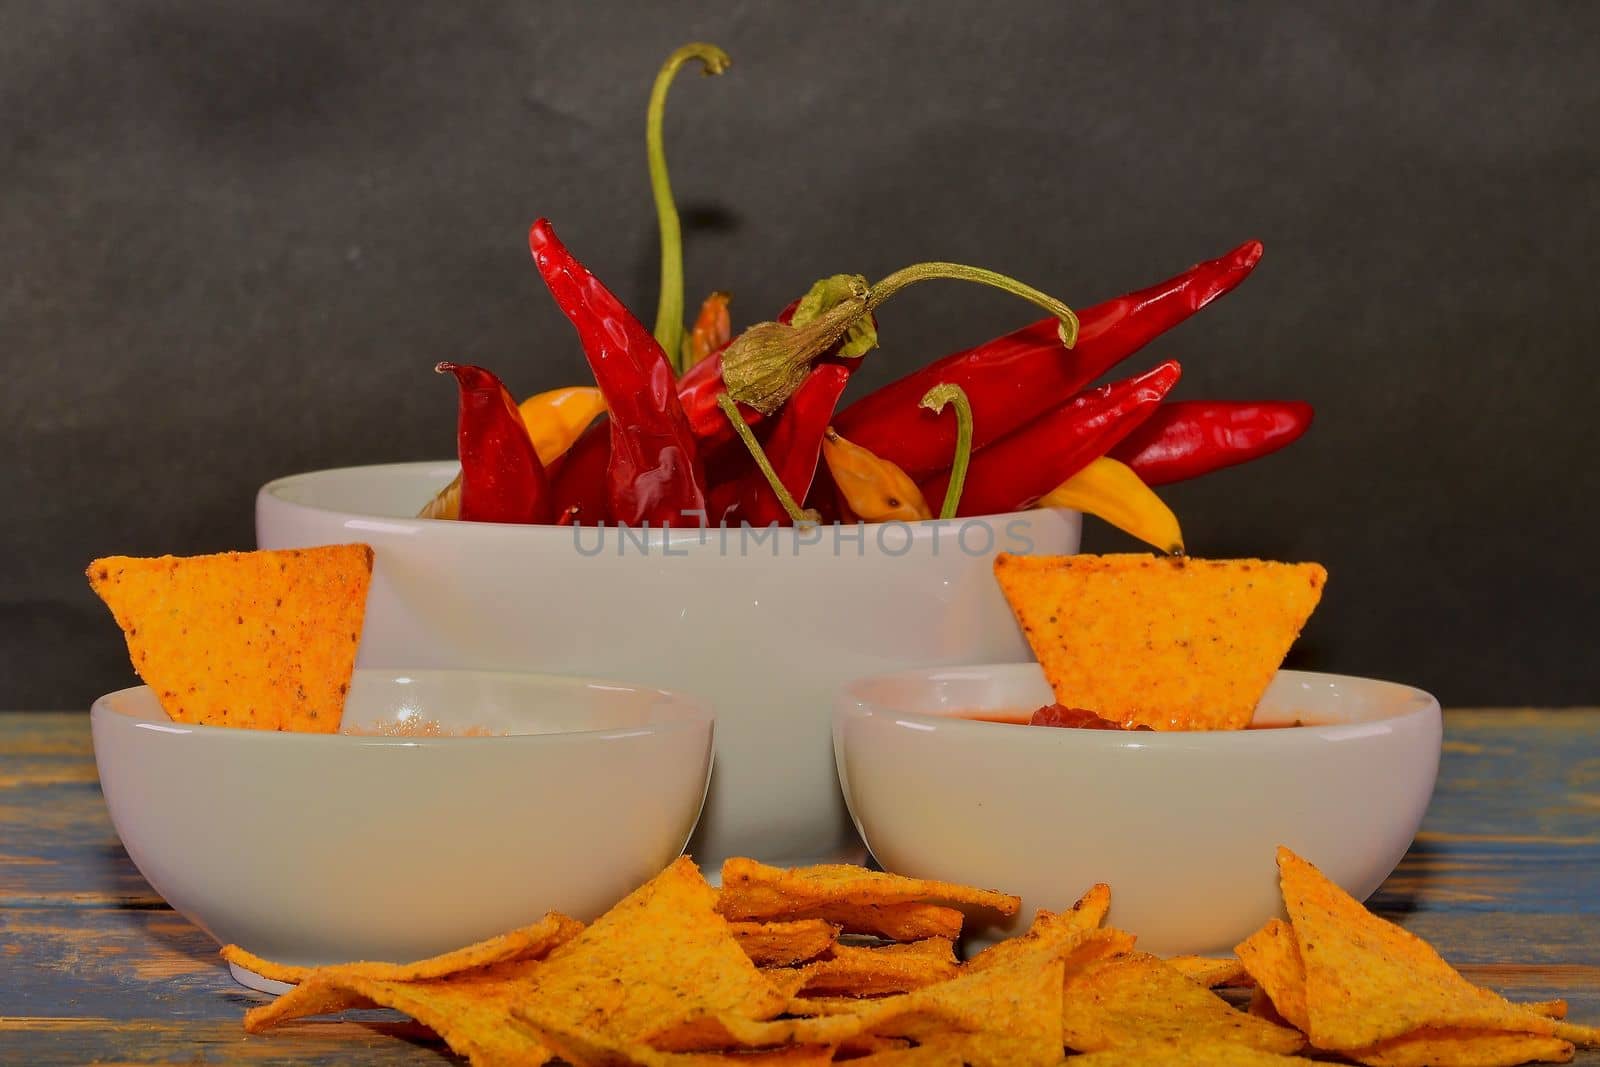 Chili corn-chips with salsa dip and chili peppers on wooden background. 